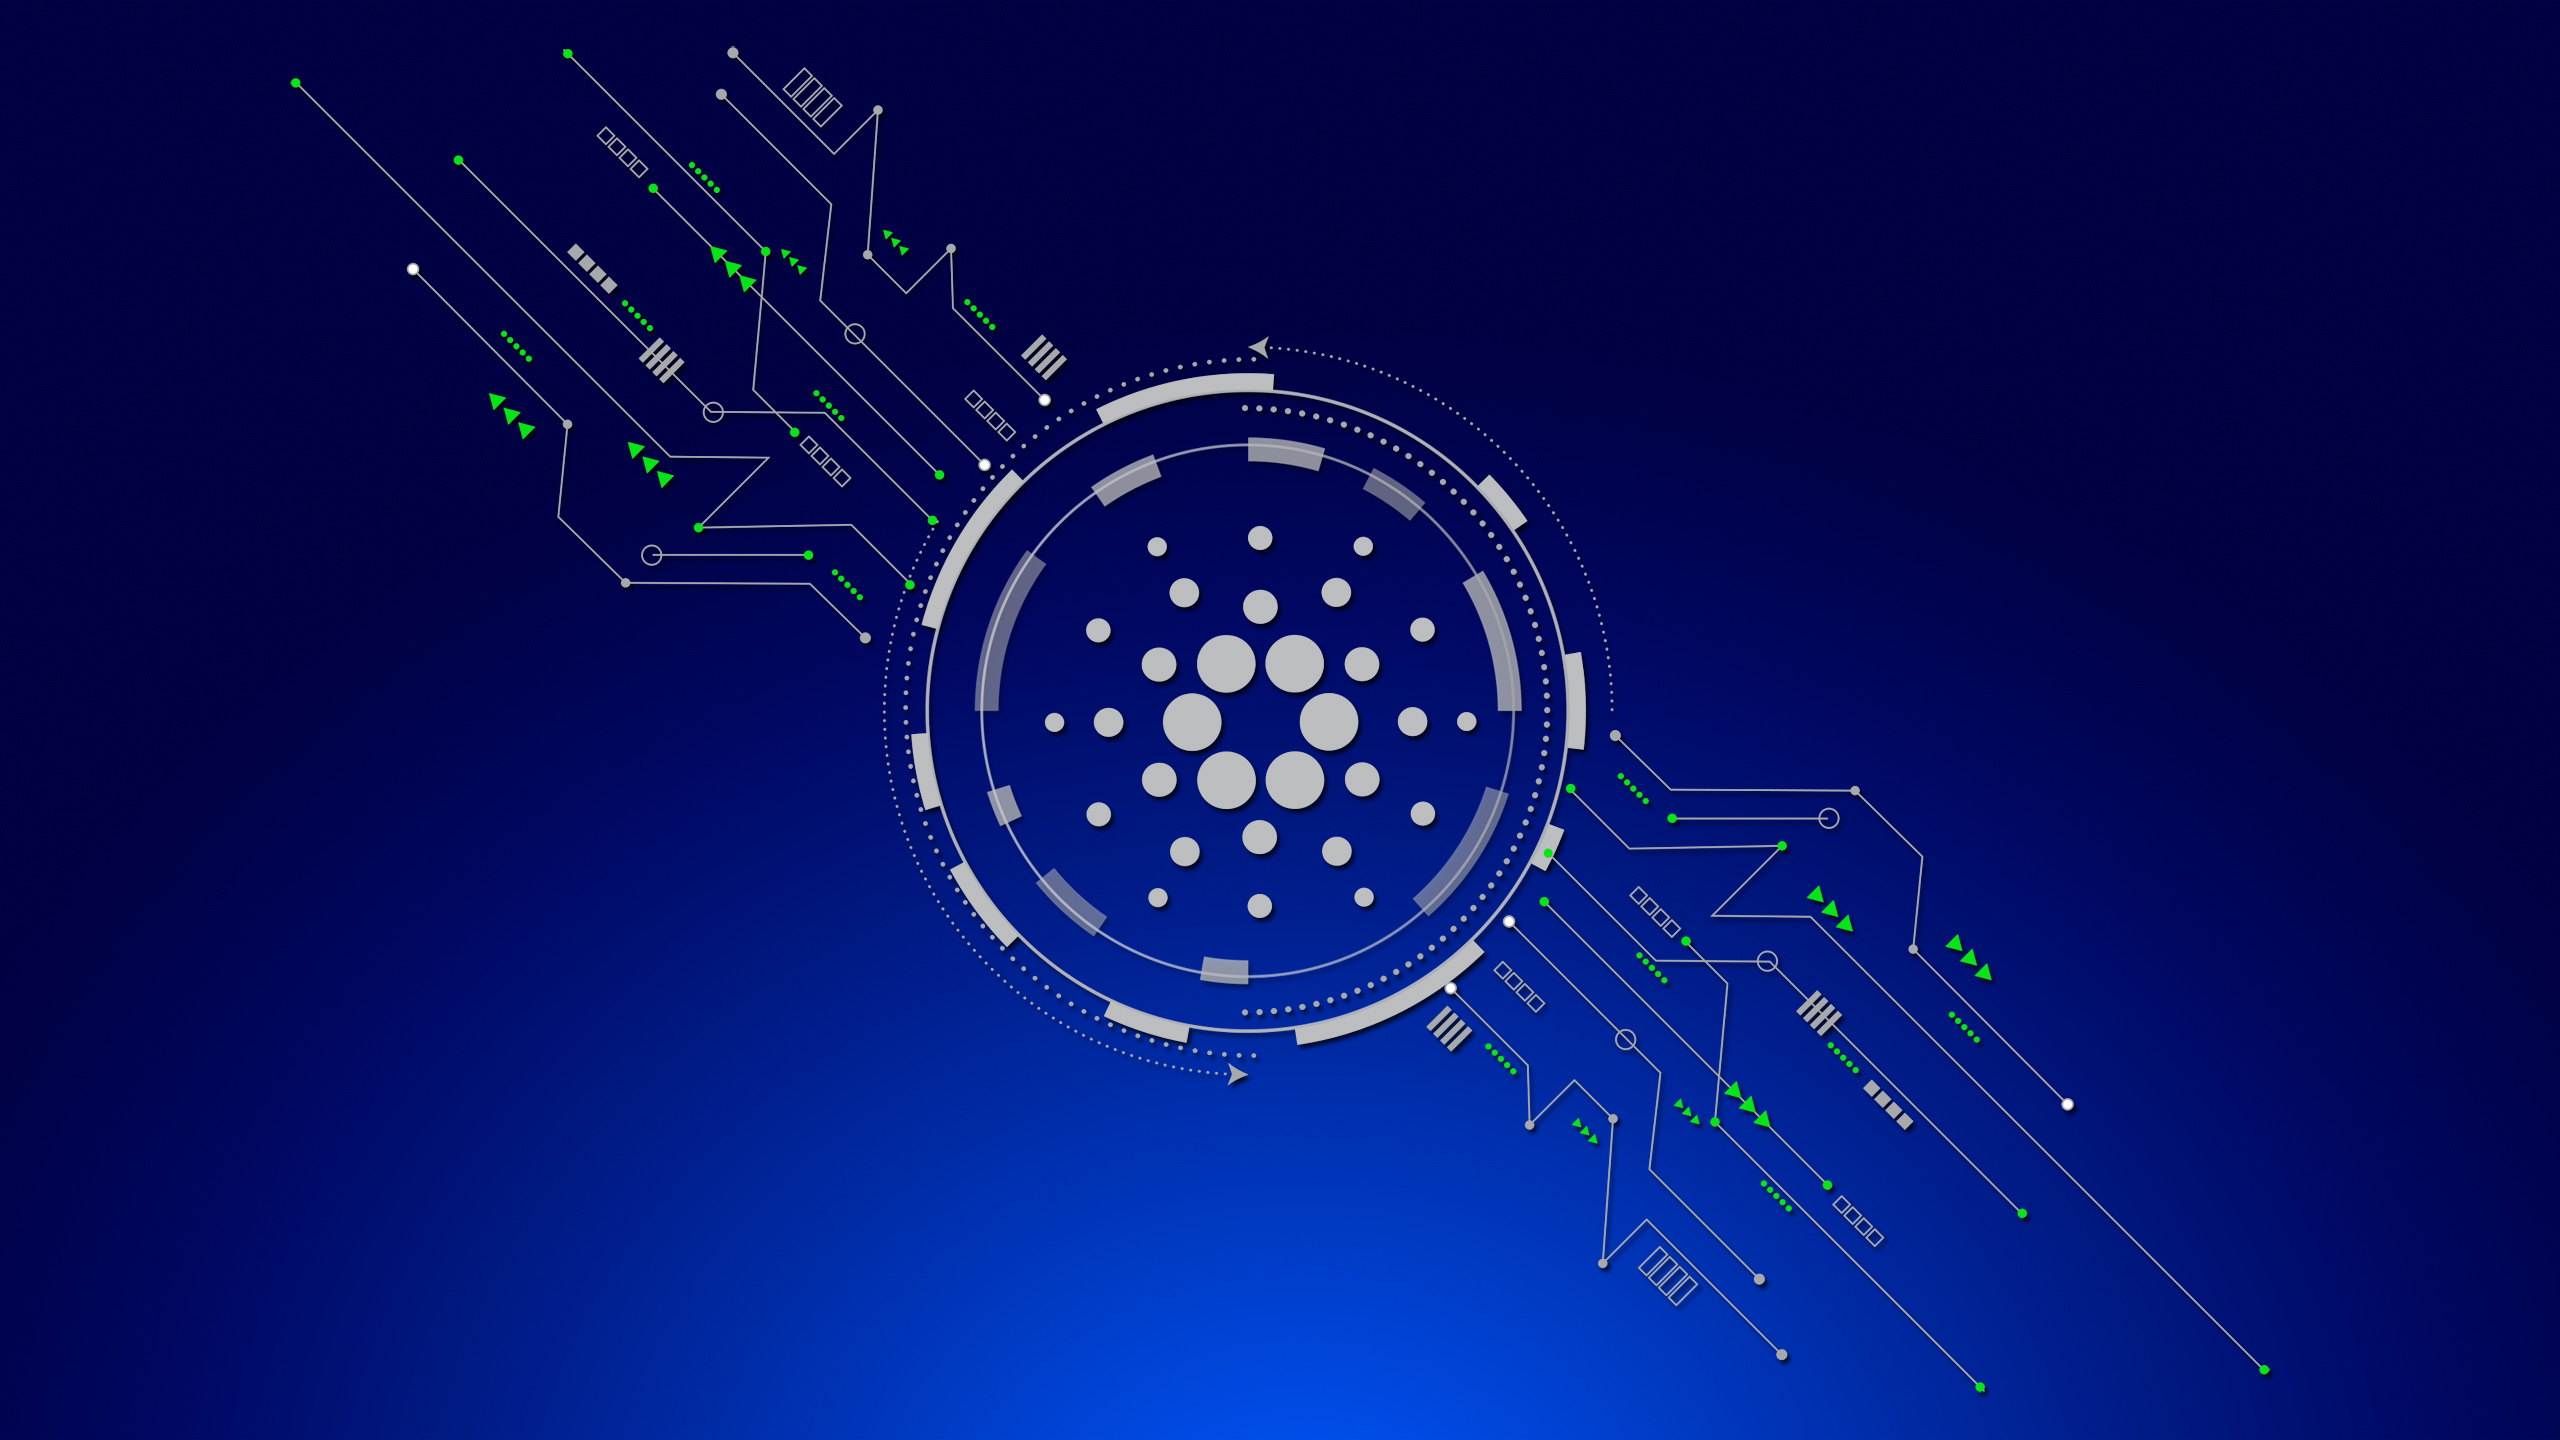 Cardano is the most energy efficient blockchain